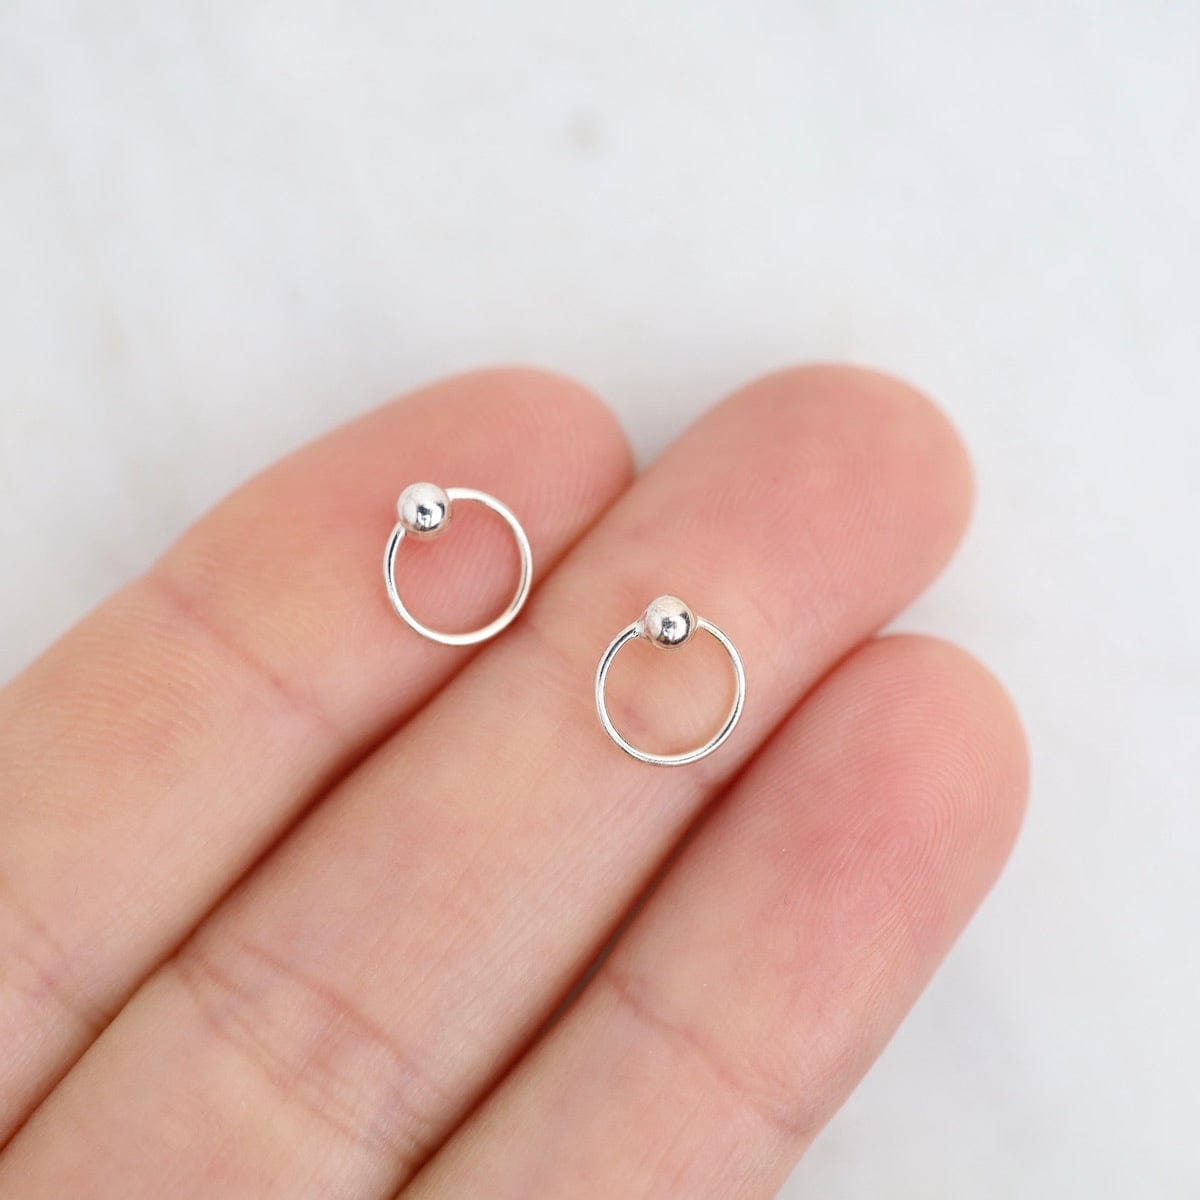 EAR Sterling Silver 7mm Tiny Sleeper Hoops with Ball